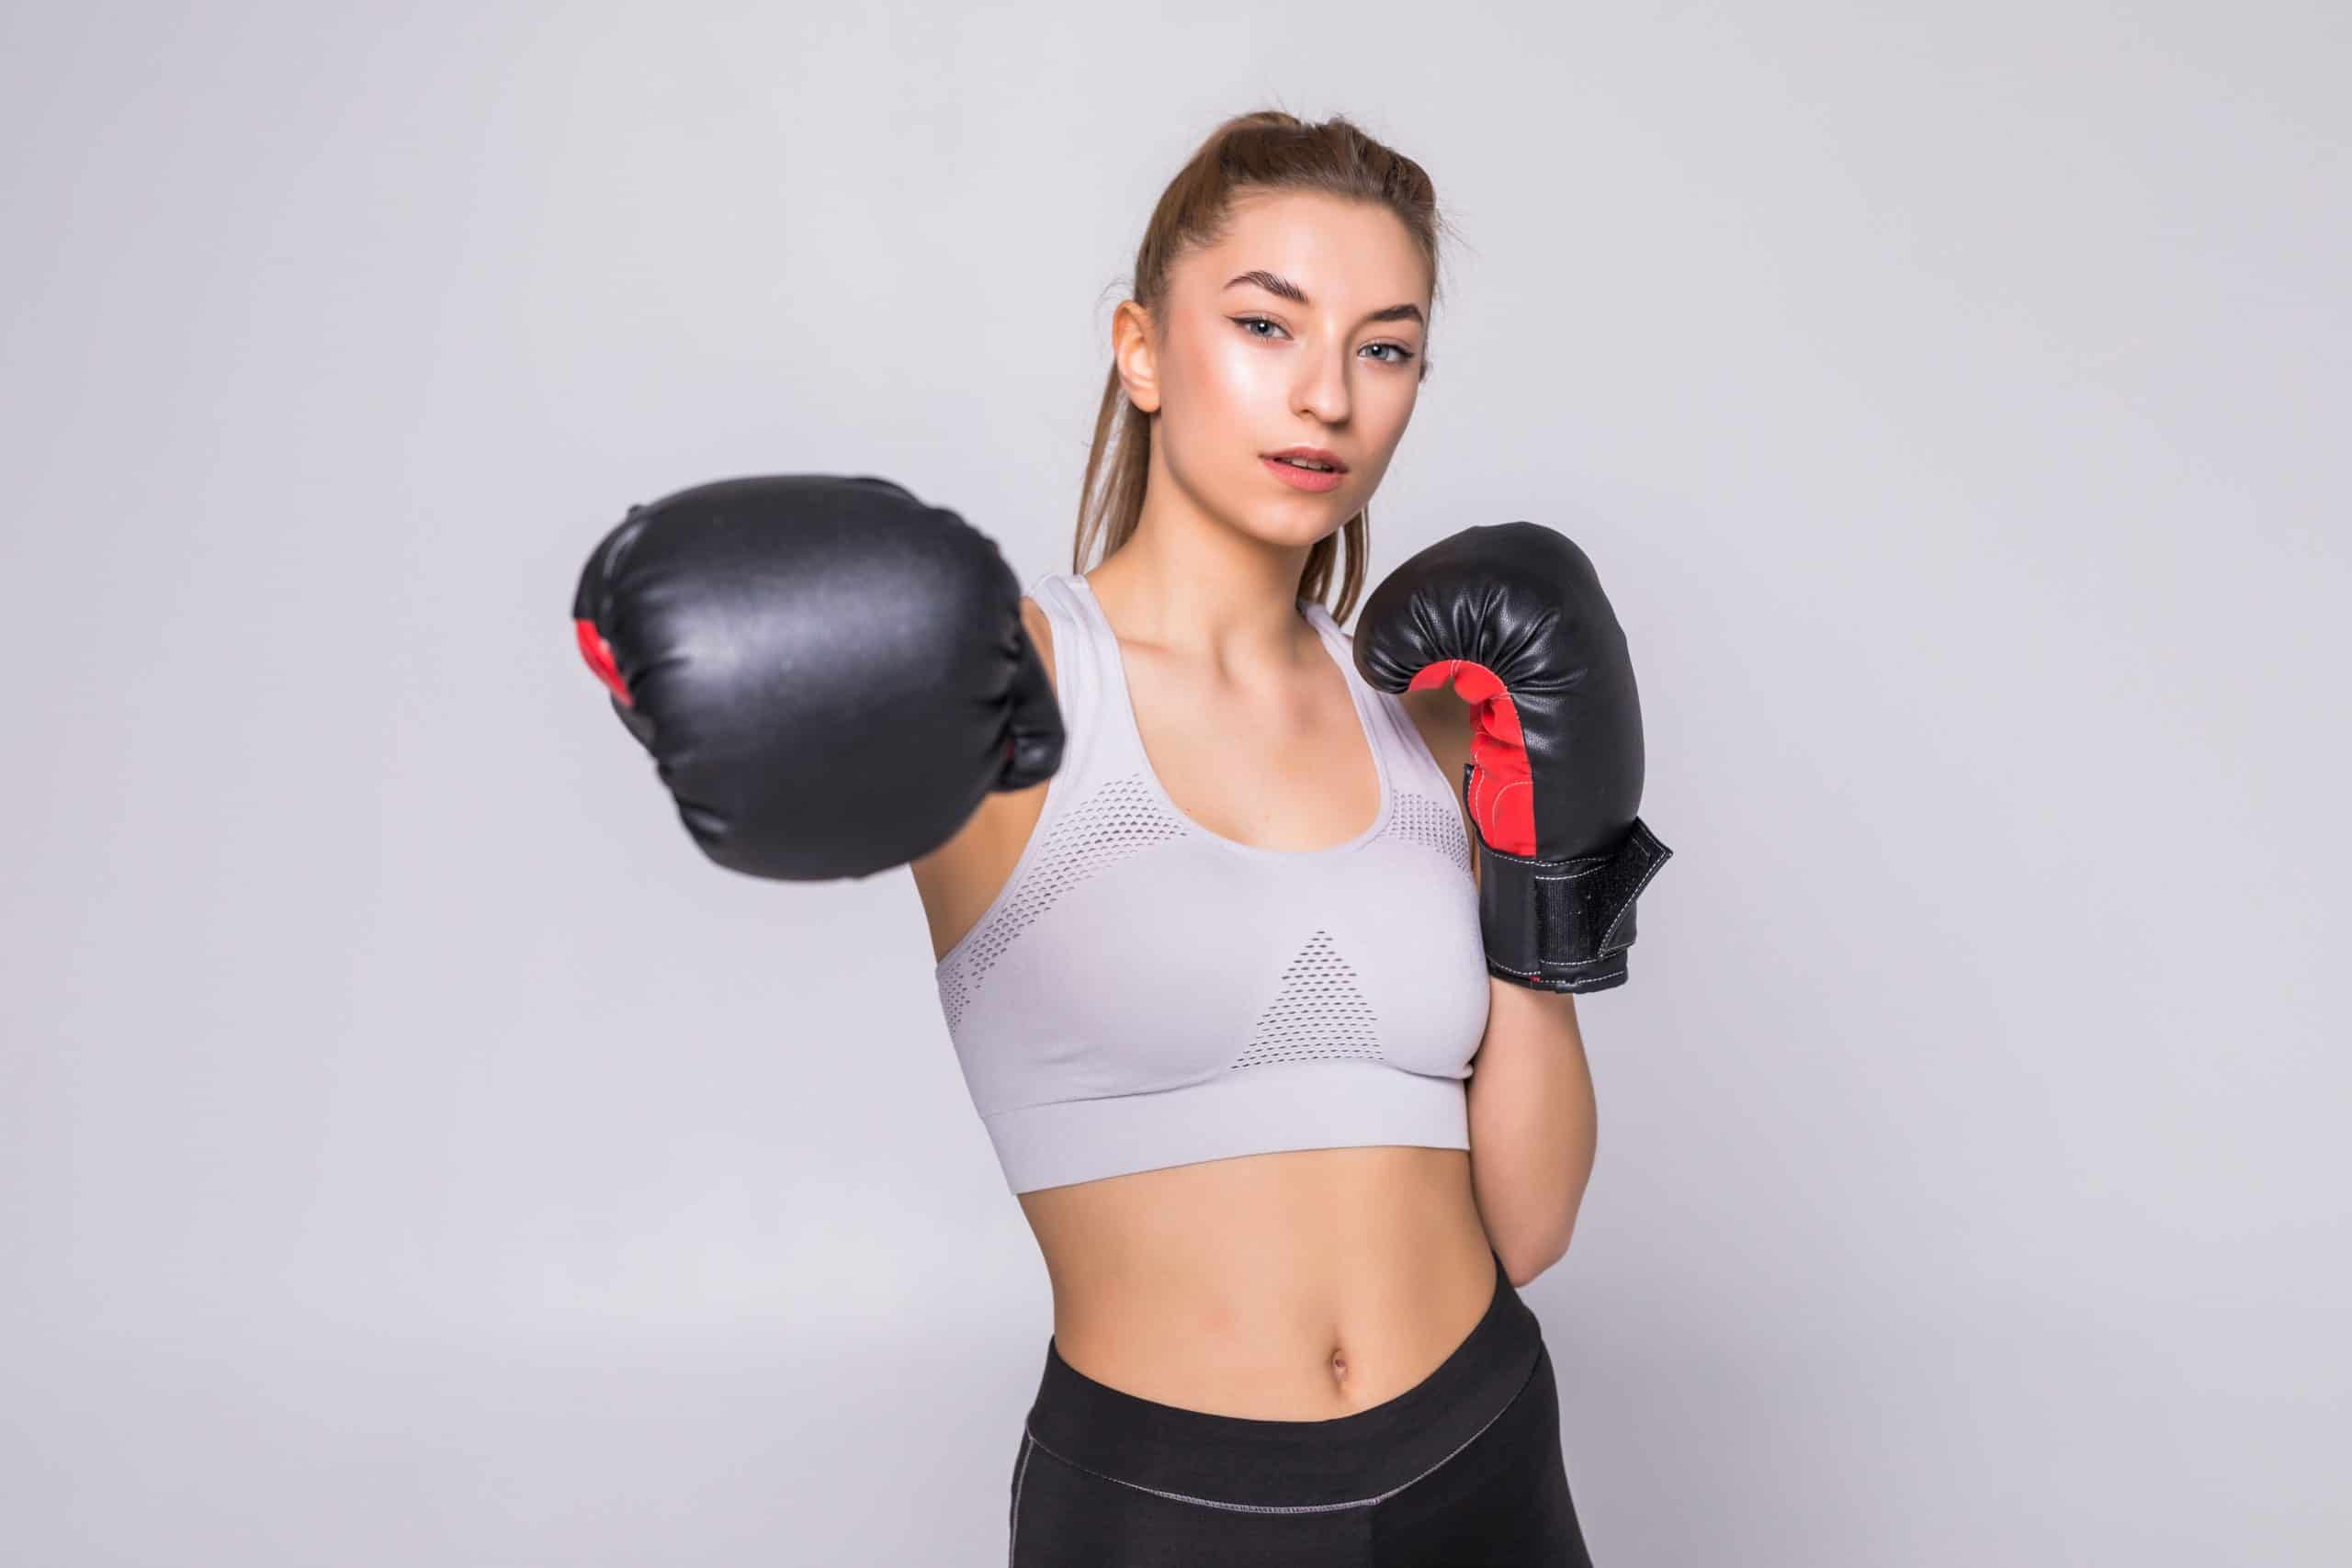 Boxing workouts at home – how to go about it?